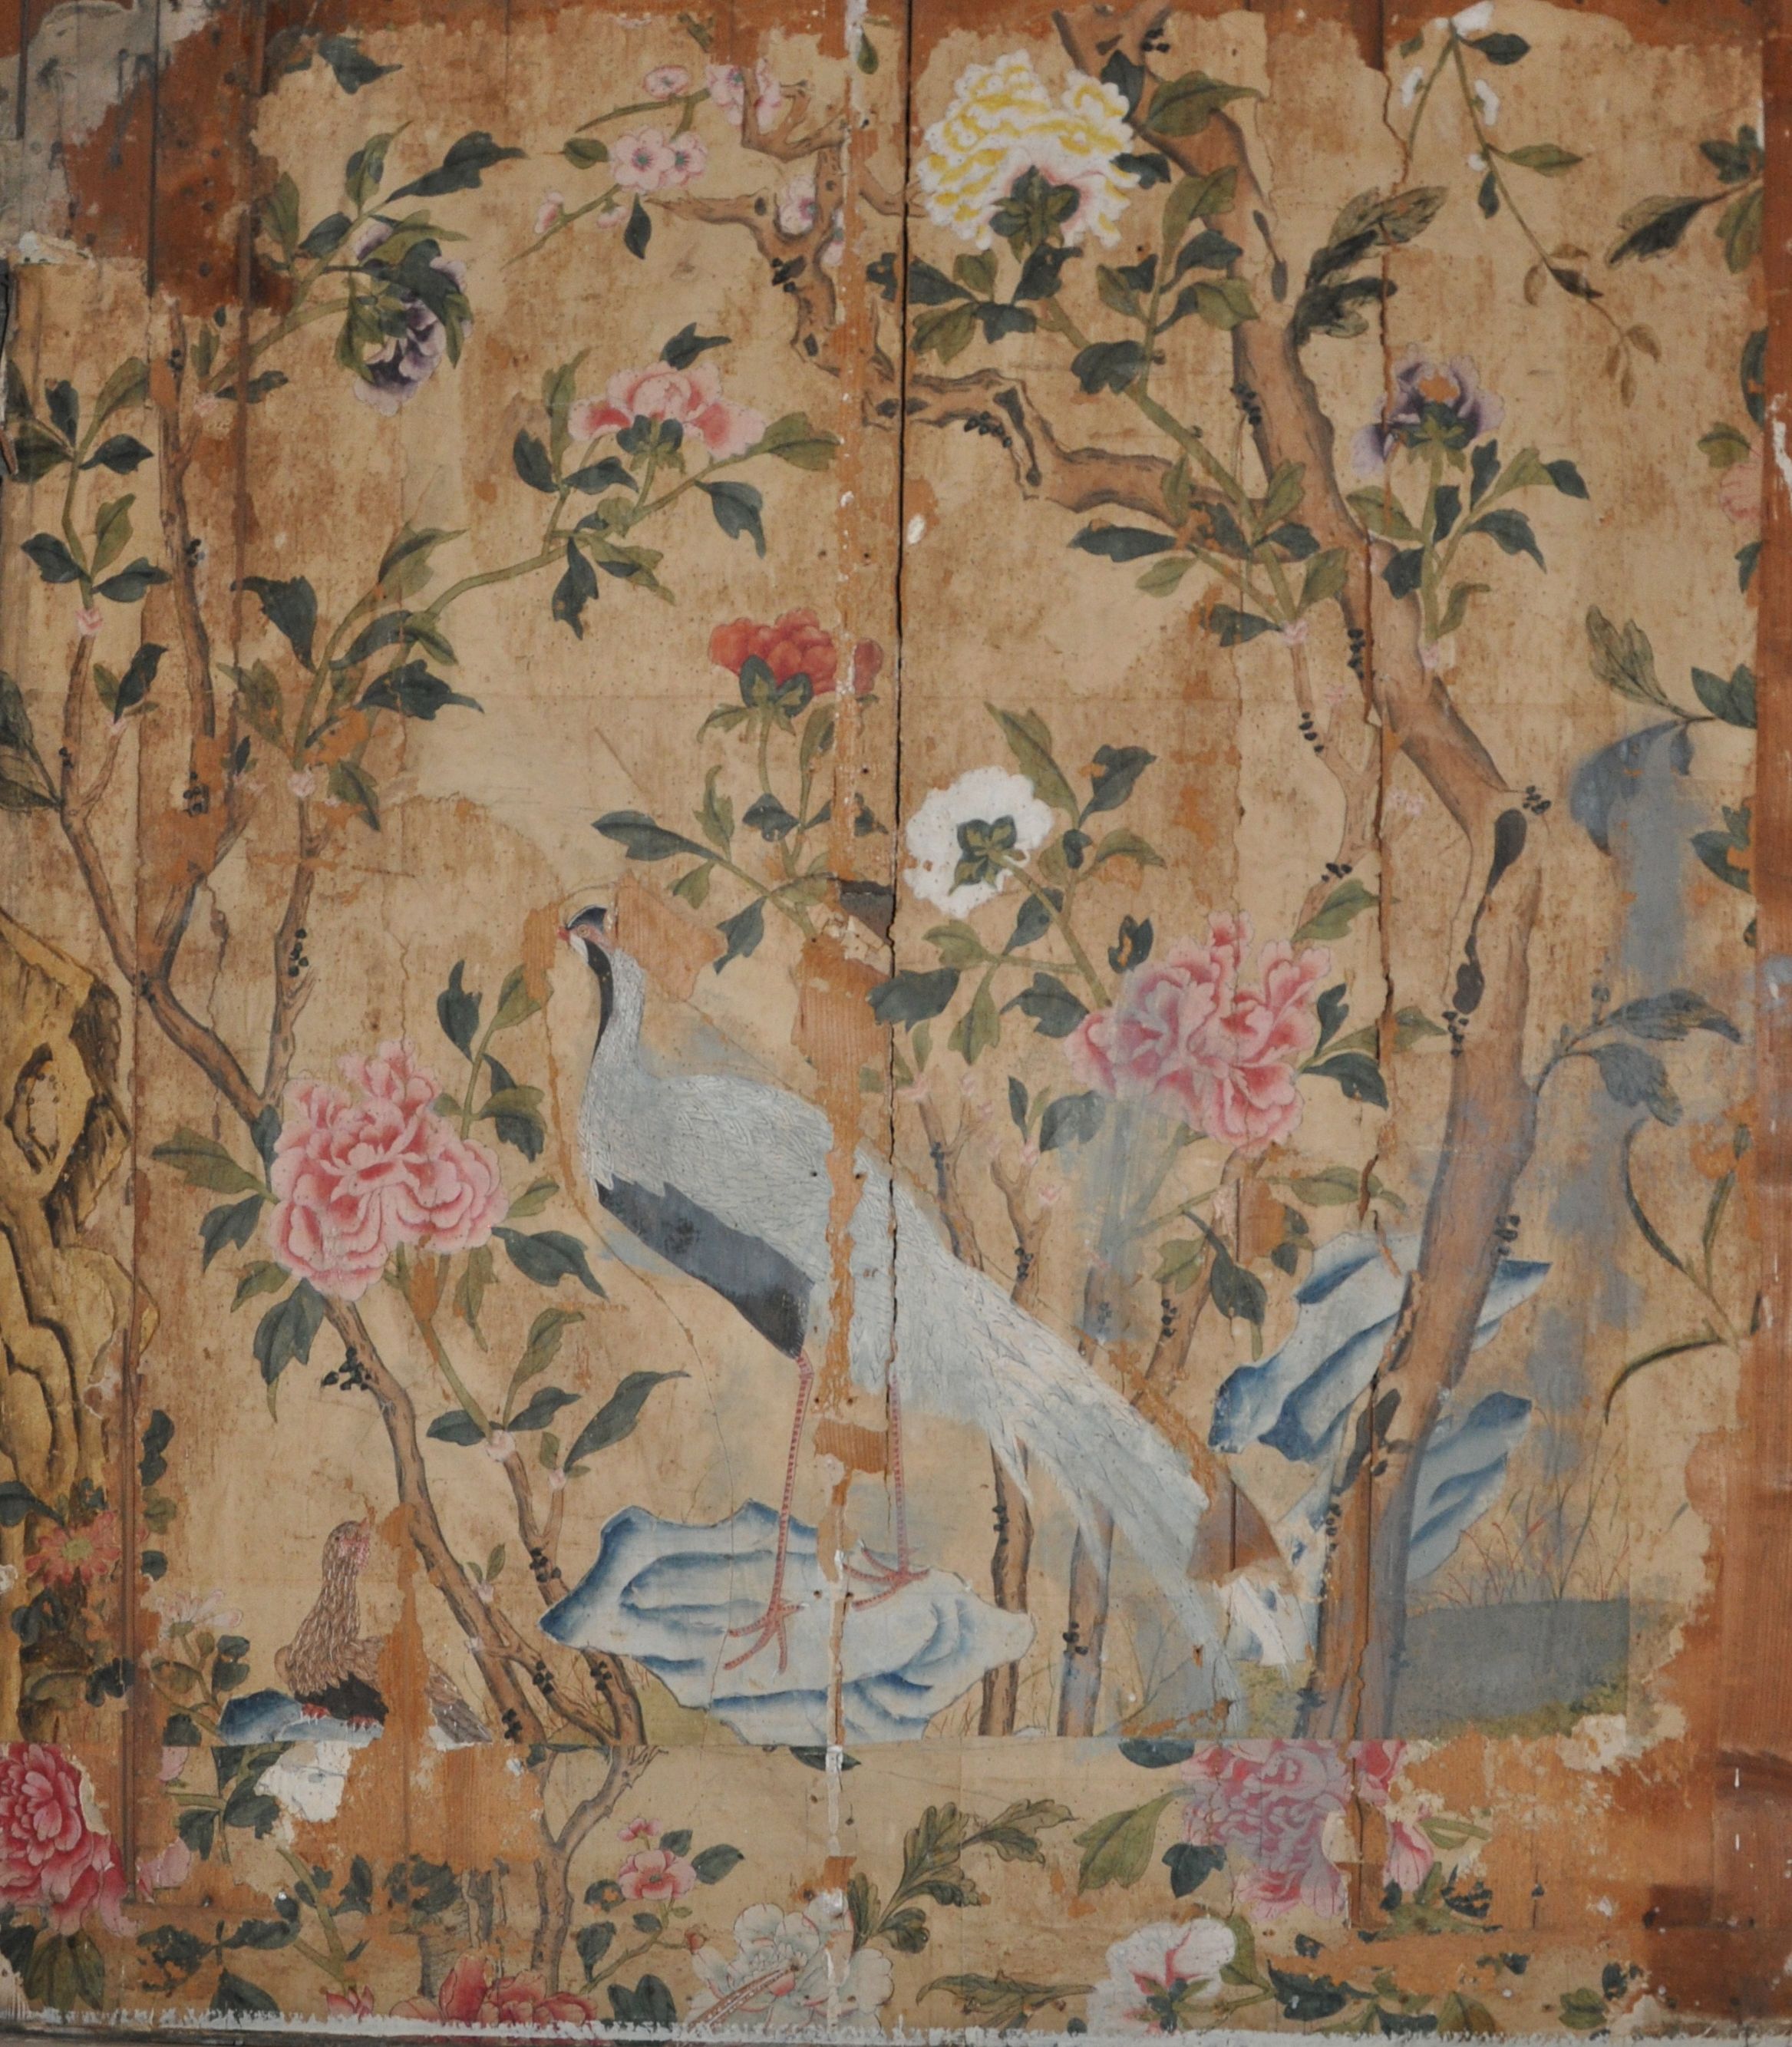 The History Blog » Blog Archive » 18th c. Chinese wallpaper found ...